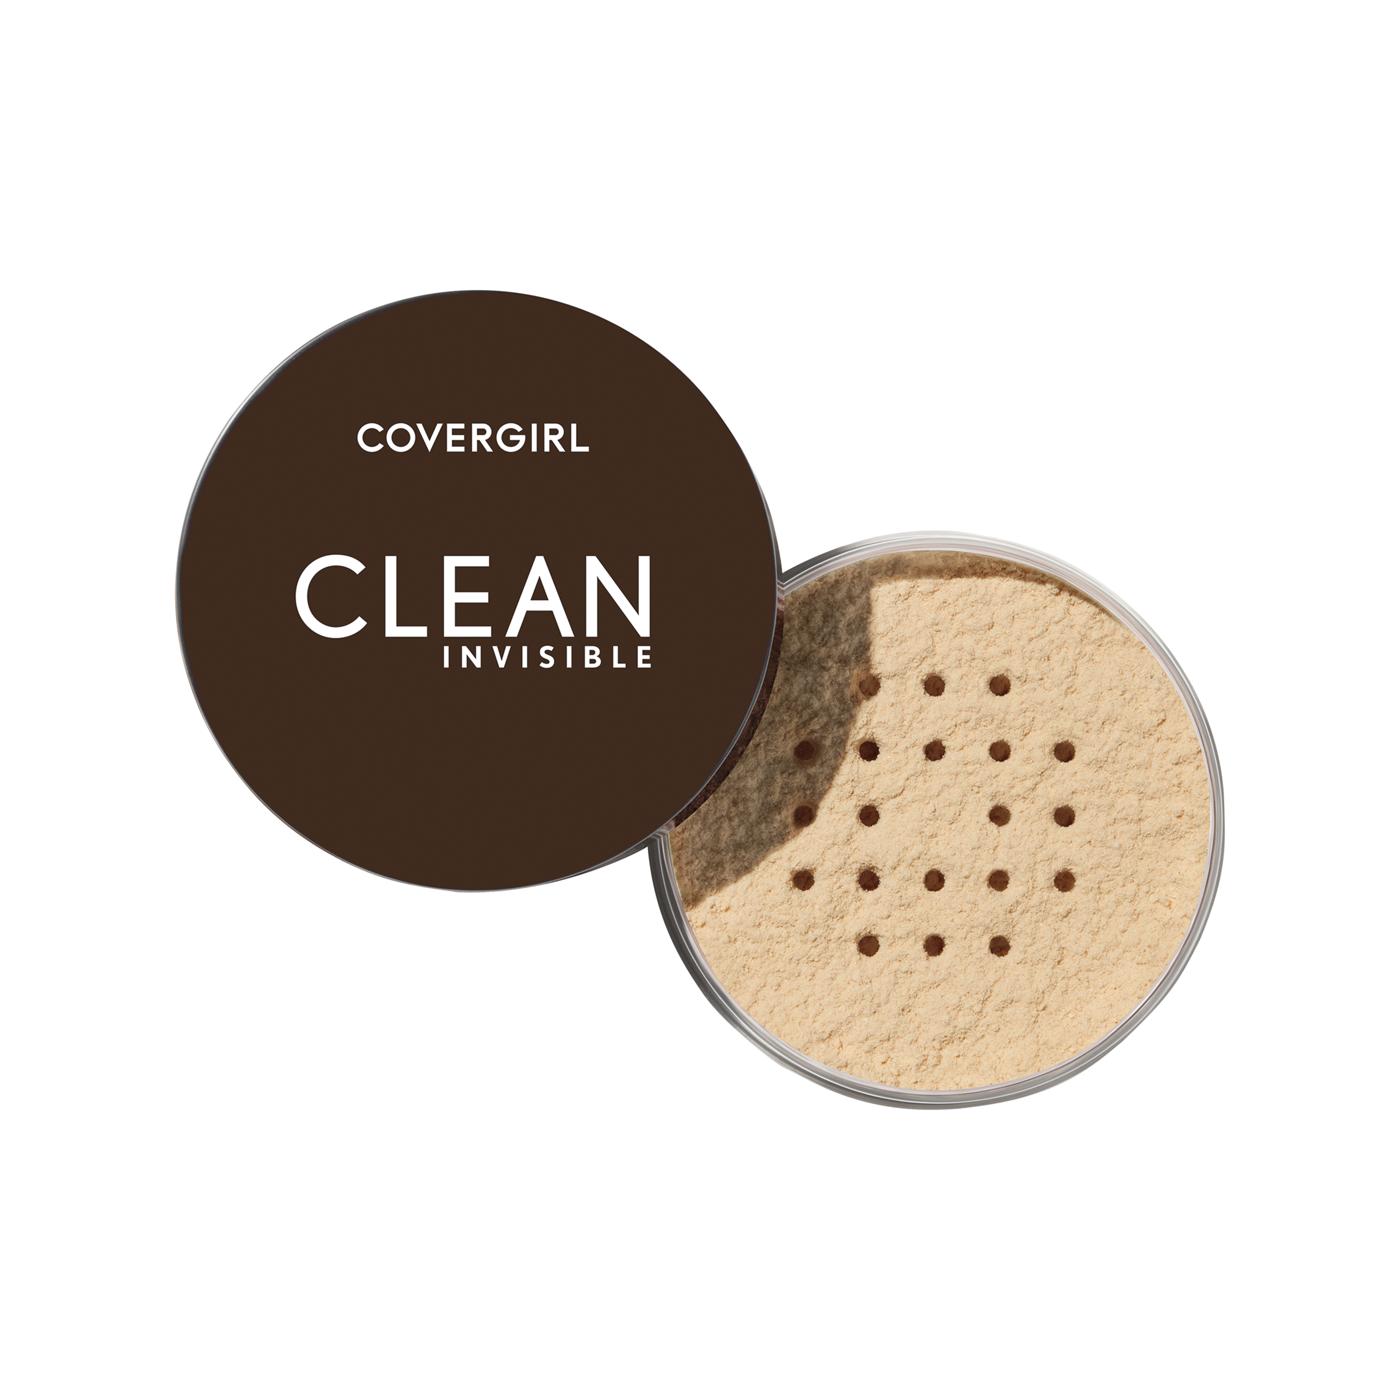 Covergirl Clean Invisible Loose Powder - Translucent Fair; image 8 of 13